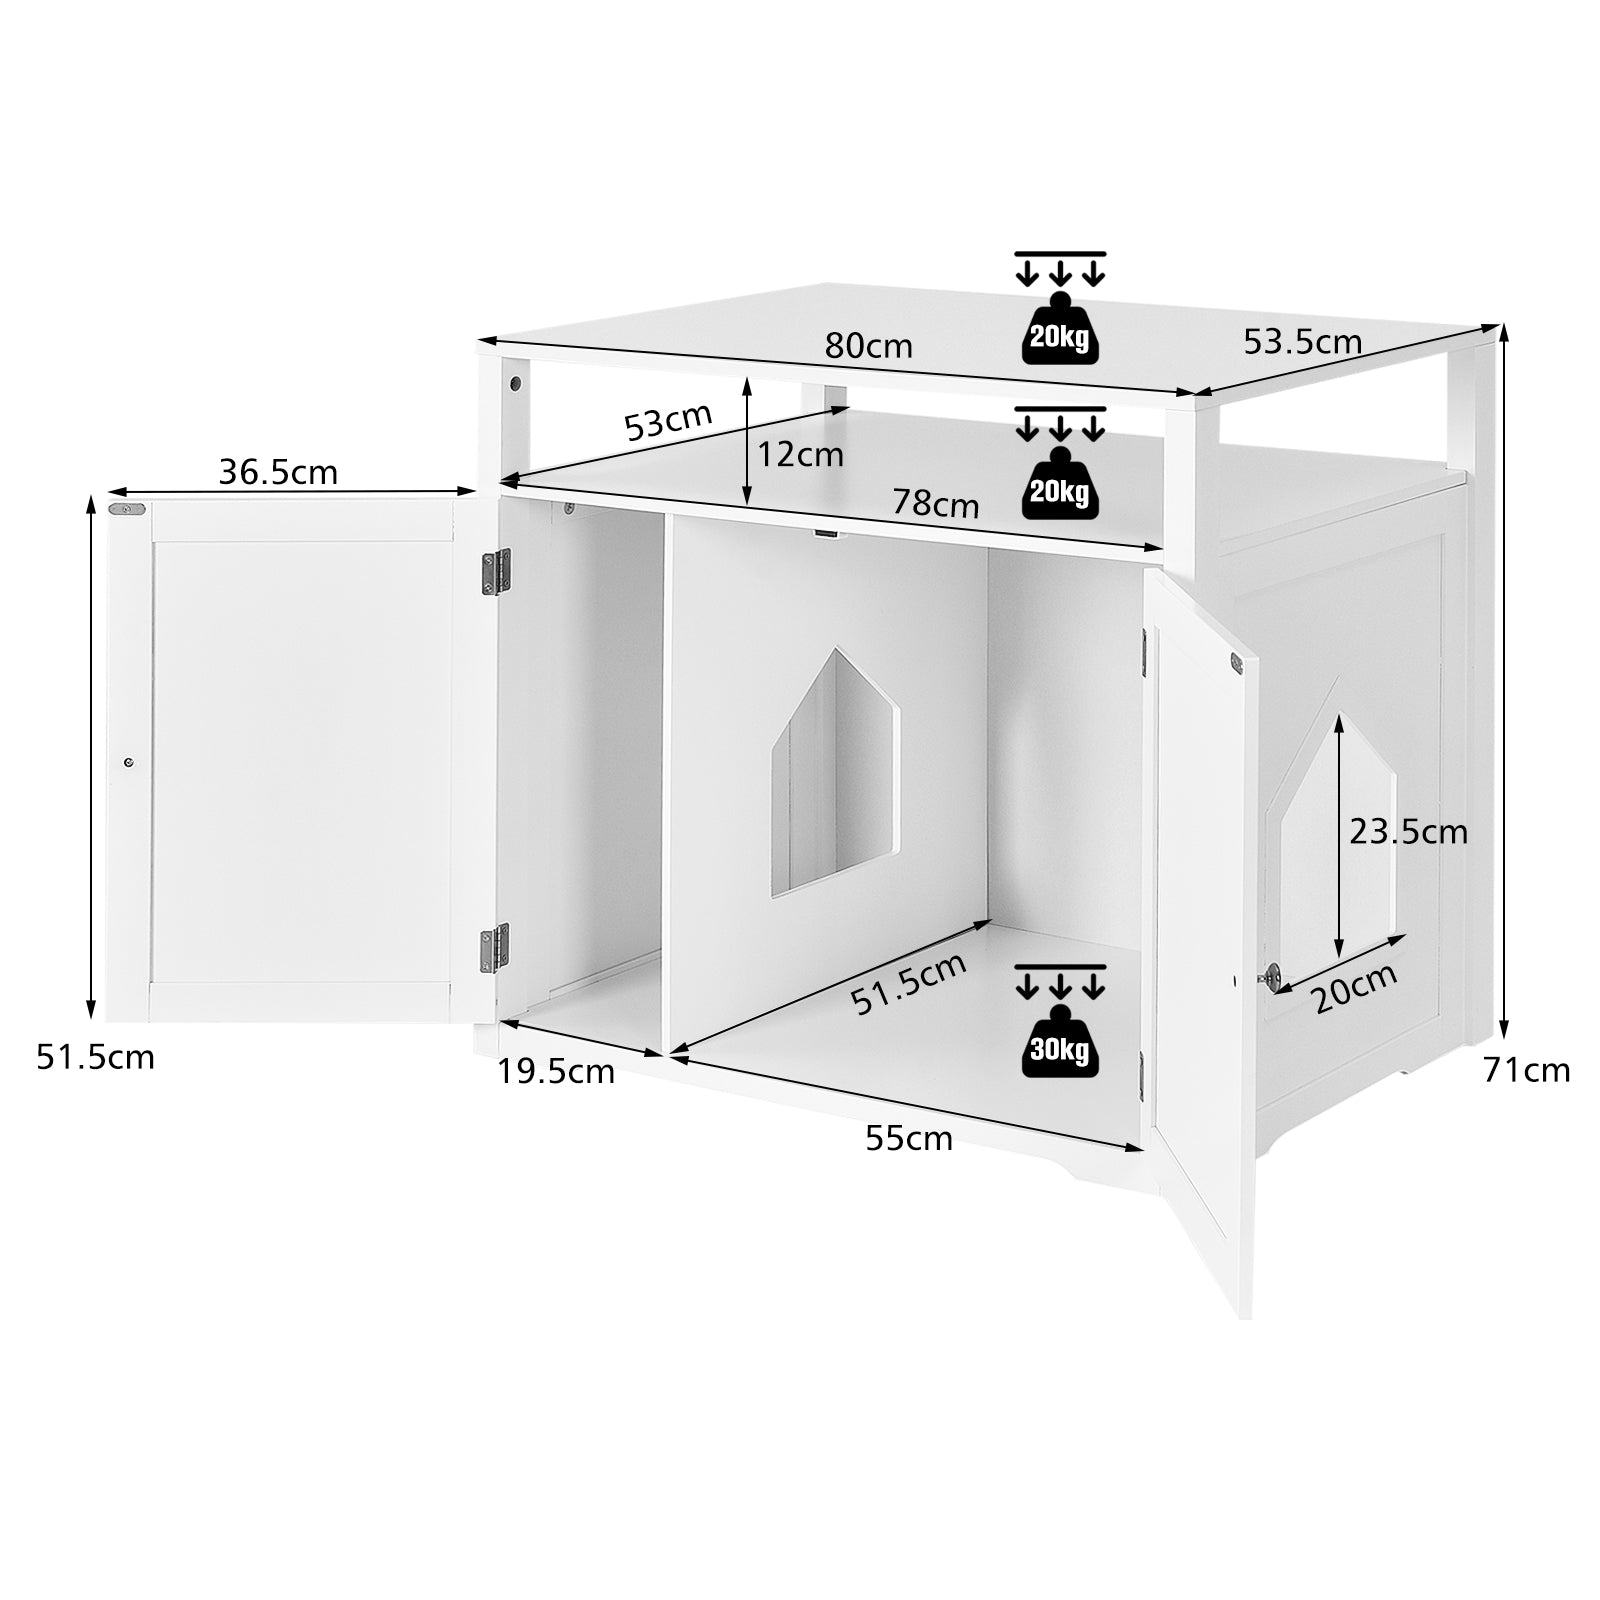 Cat Litter Box Enclosure with Adjustable and Removable Divider-White